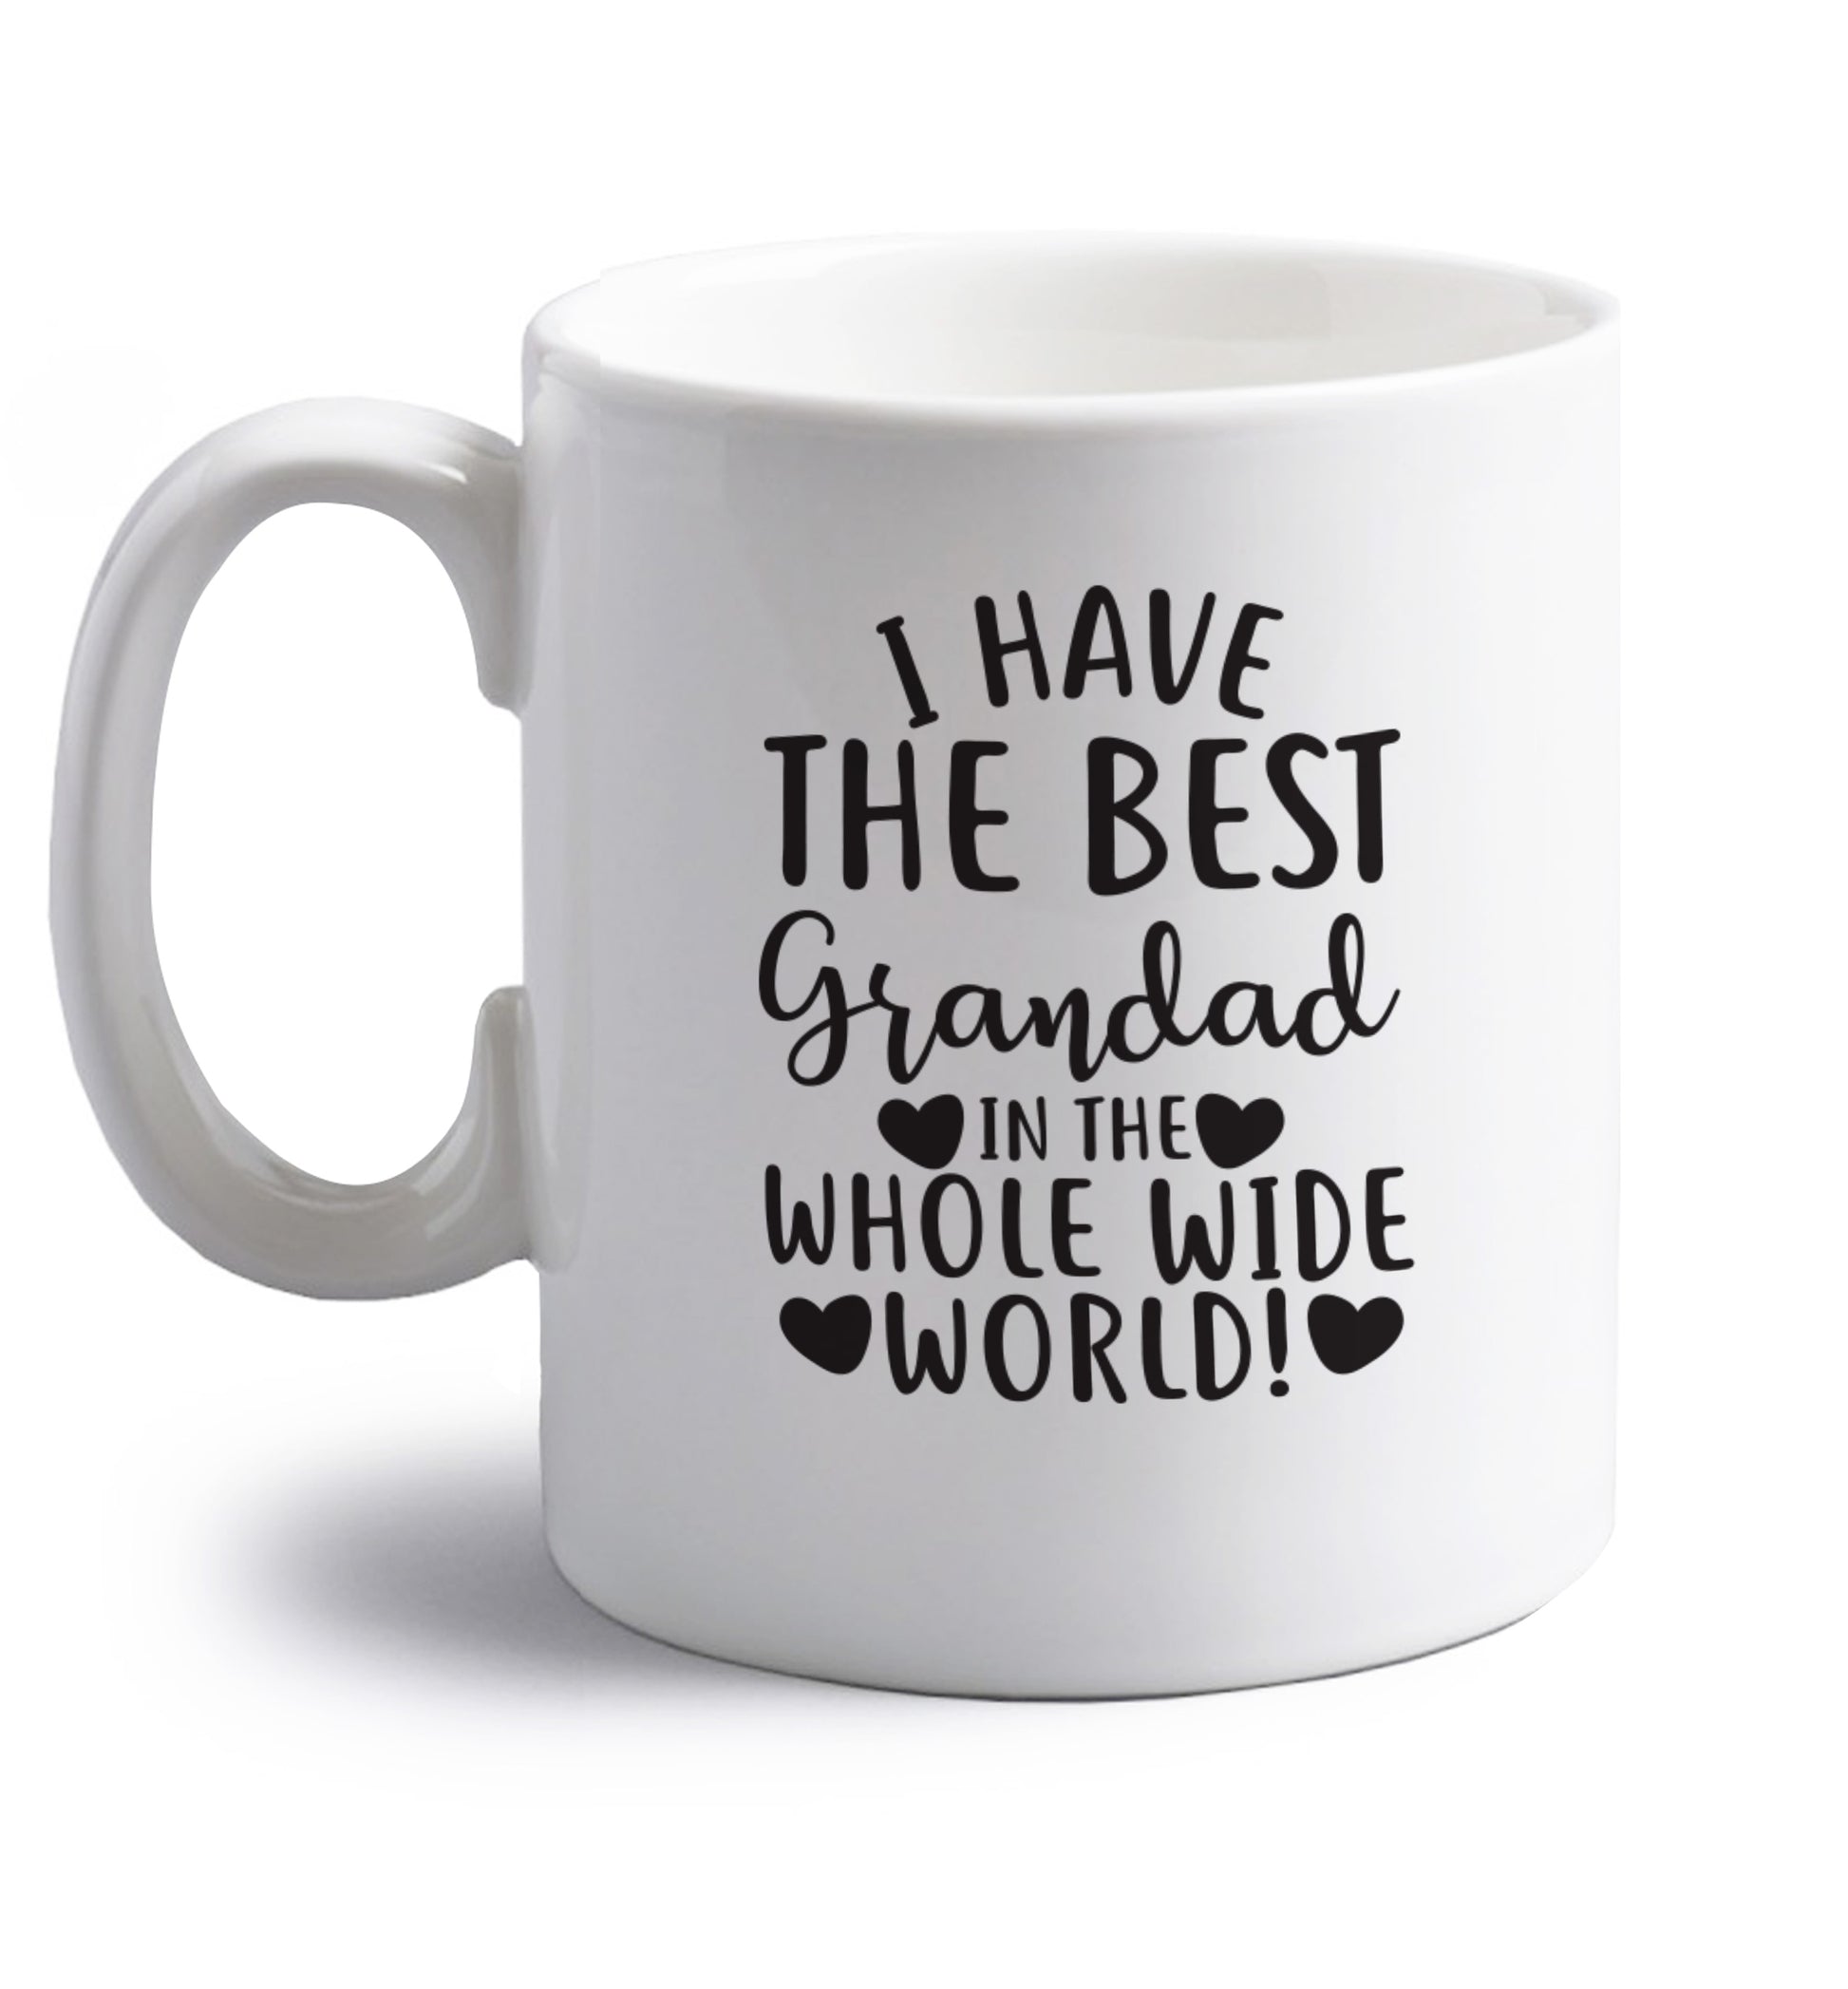 I have the best grandad in the whole wide world! right handed white ceramic mug 